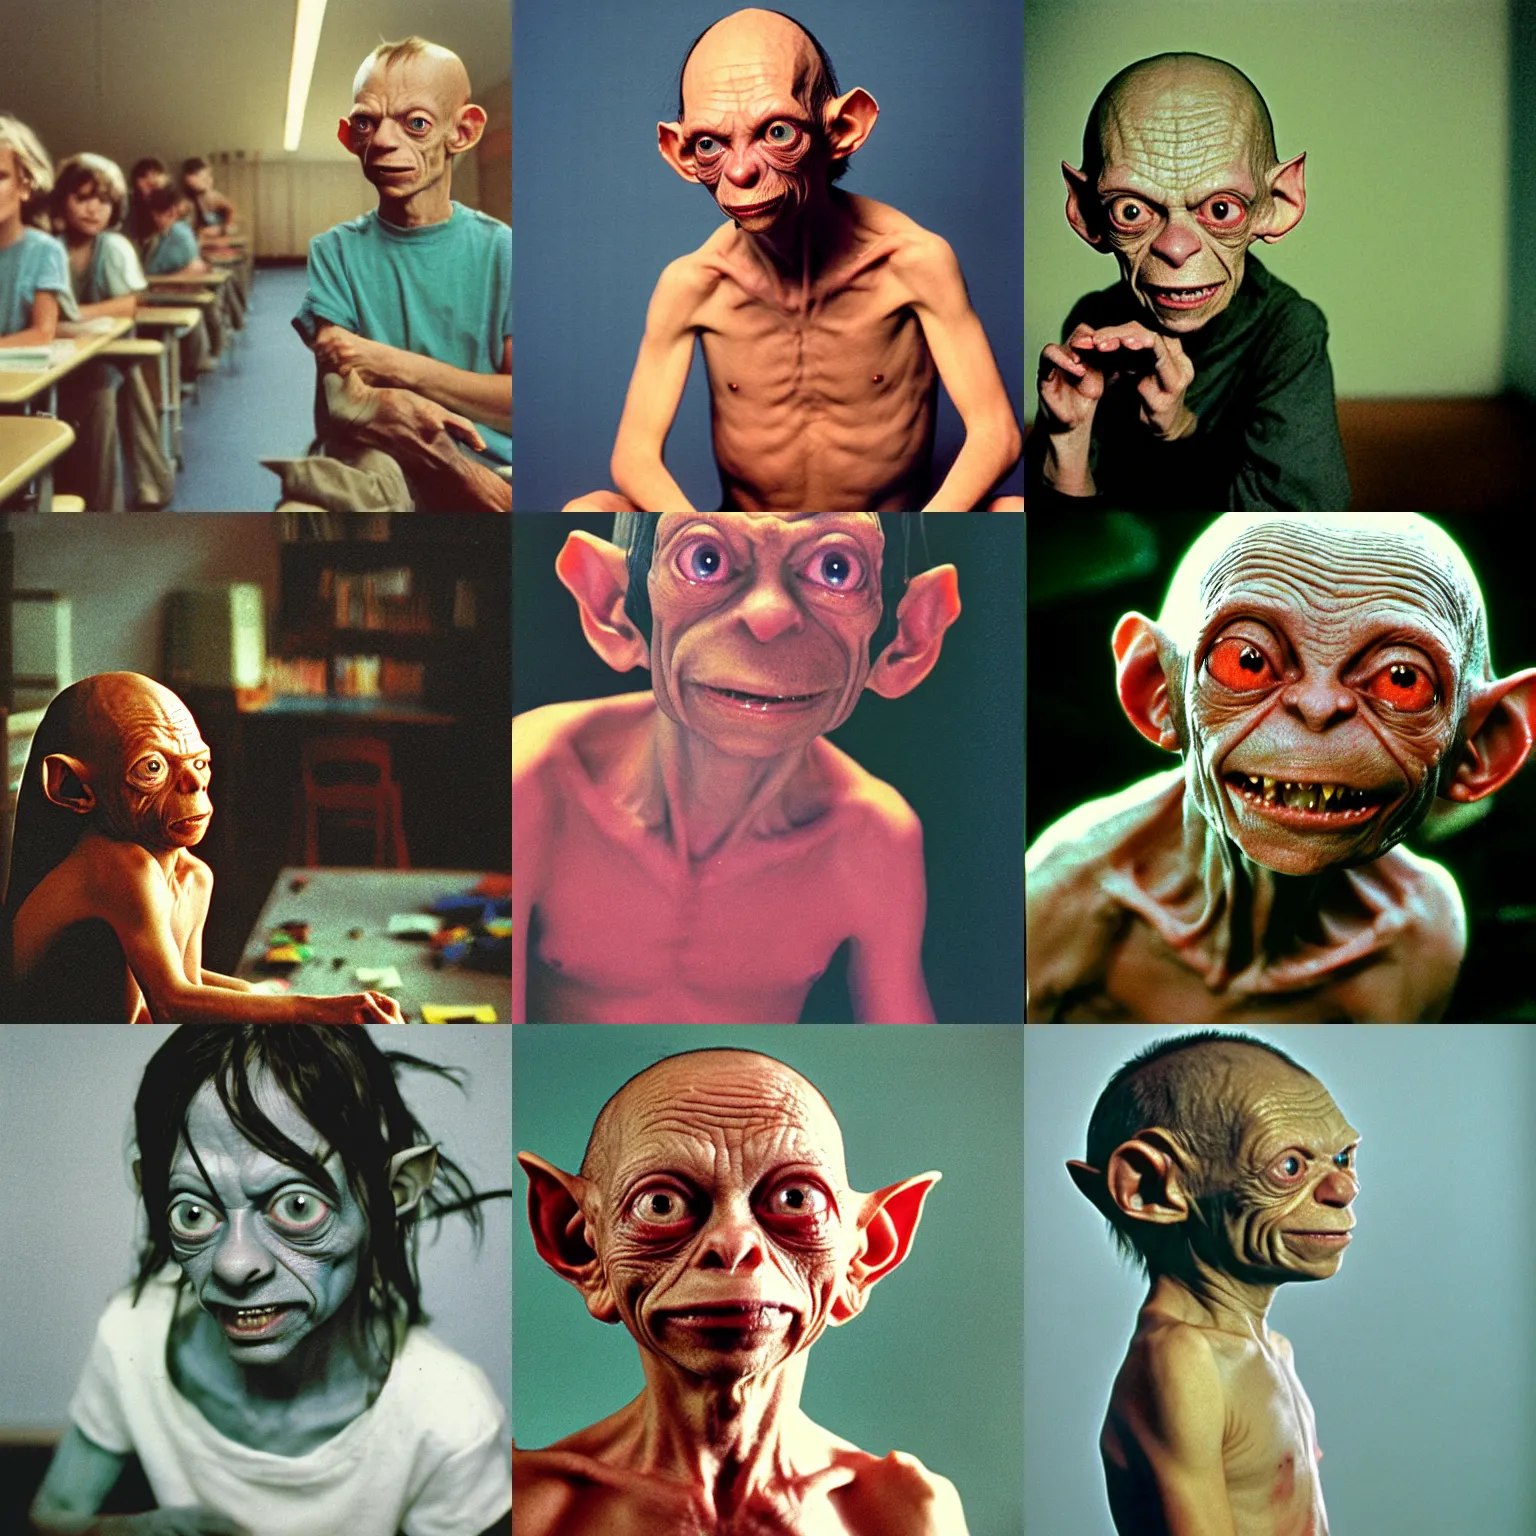 Prompt: A long-shot , color school photograph portrait of Gollum in the class room , summer, day lighting, 1990 photo from photograph Magazine.